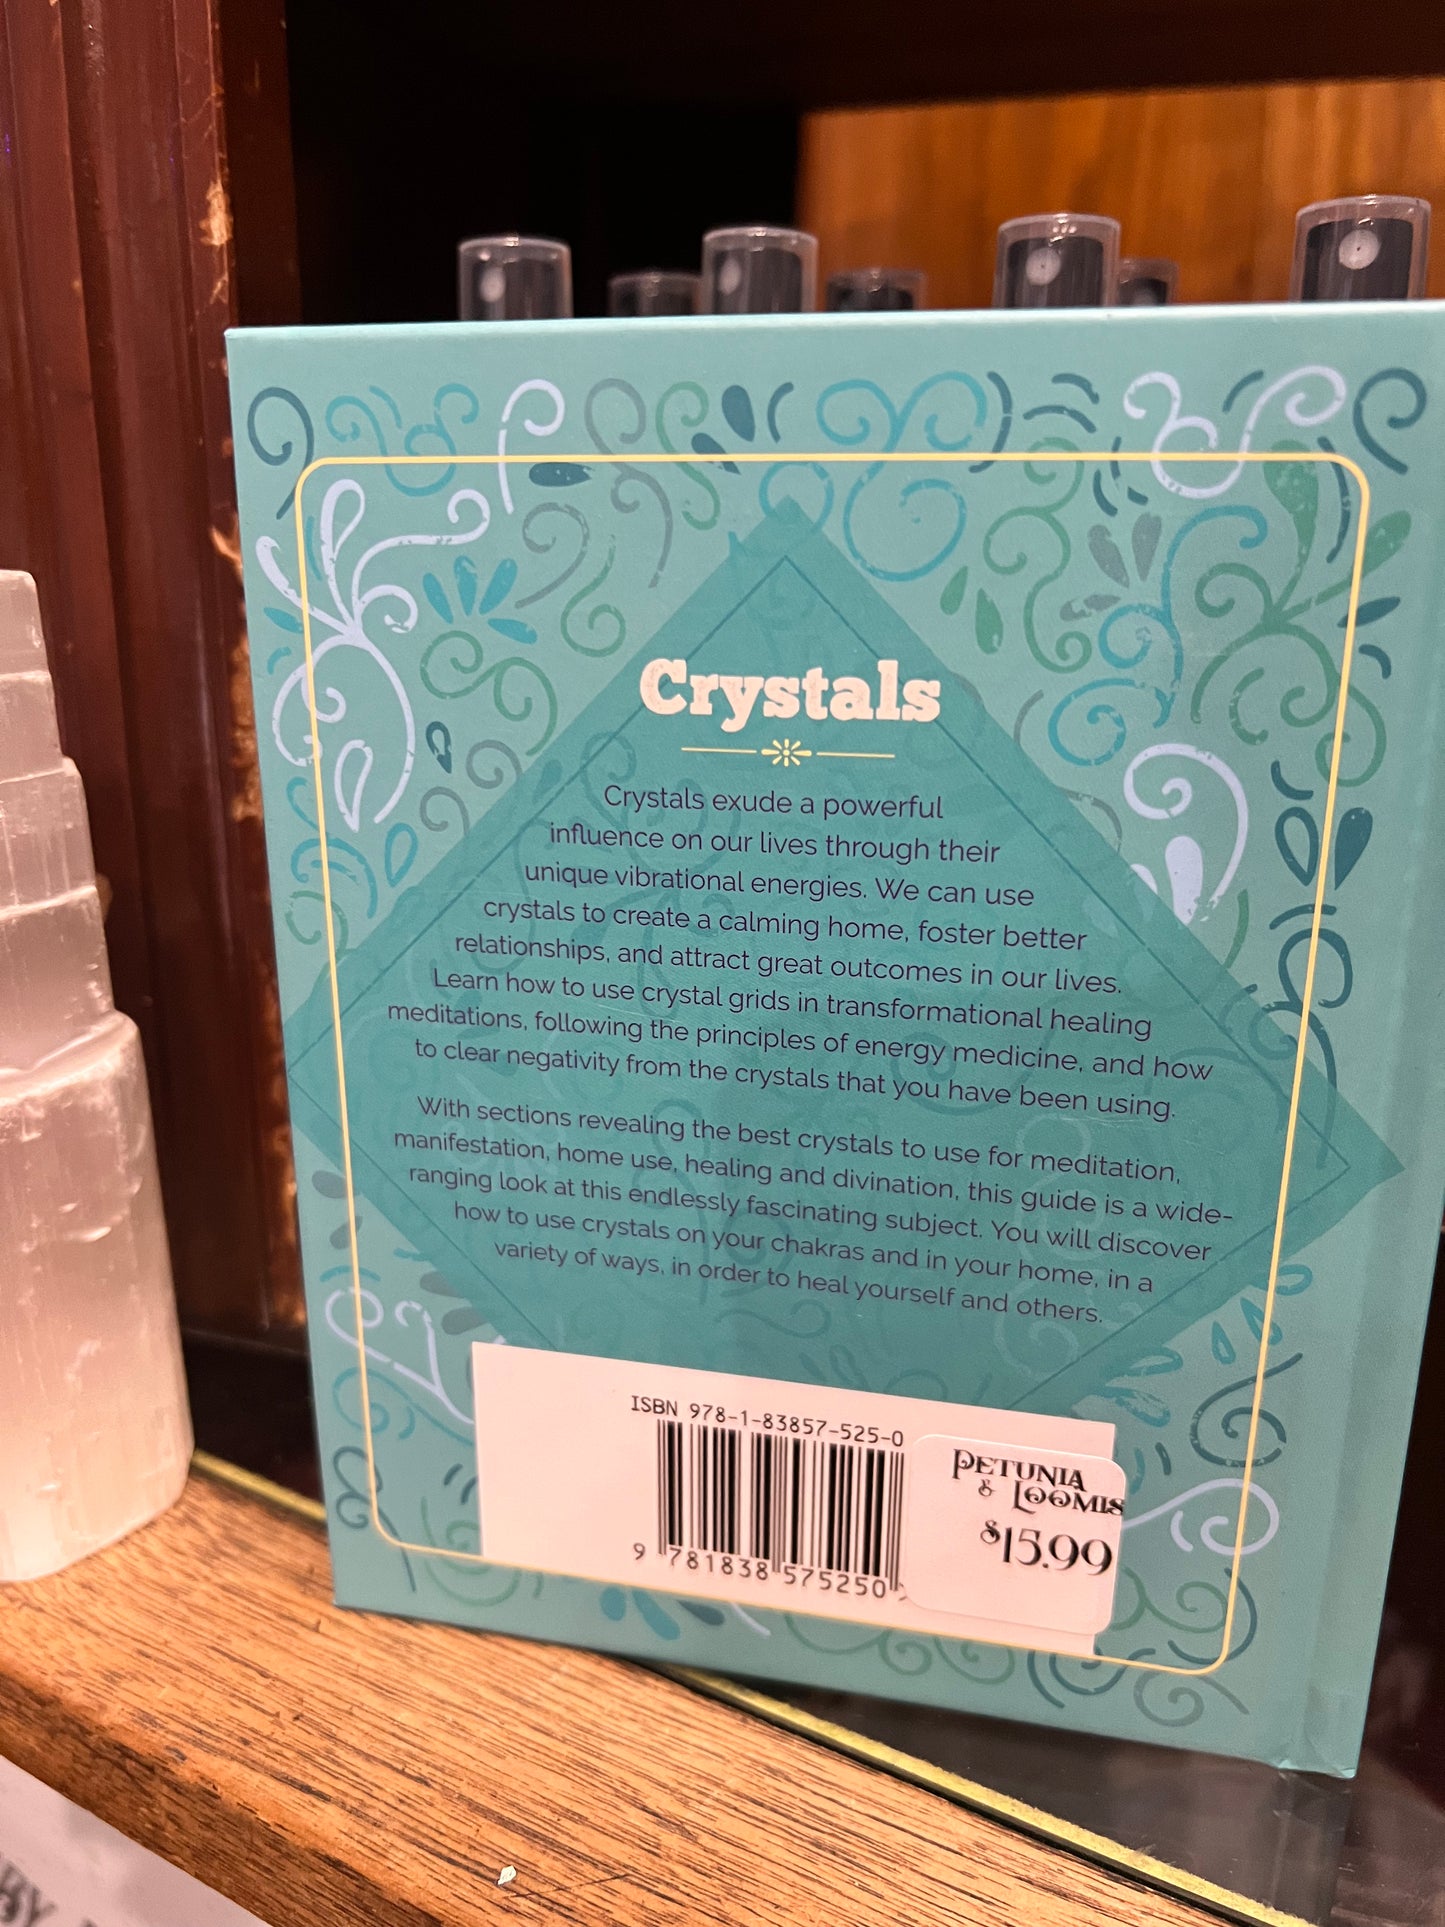 Crystals - How to use their healing powers by Emily Anderson